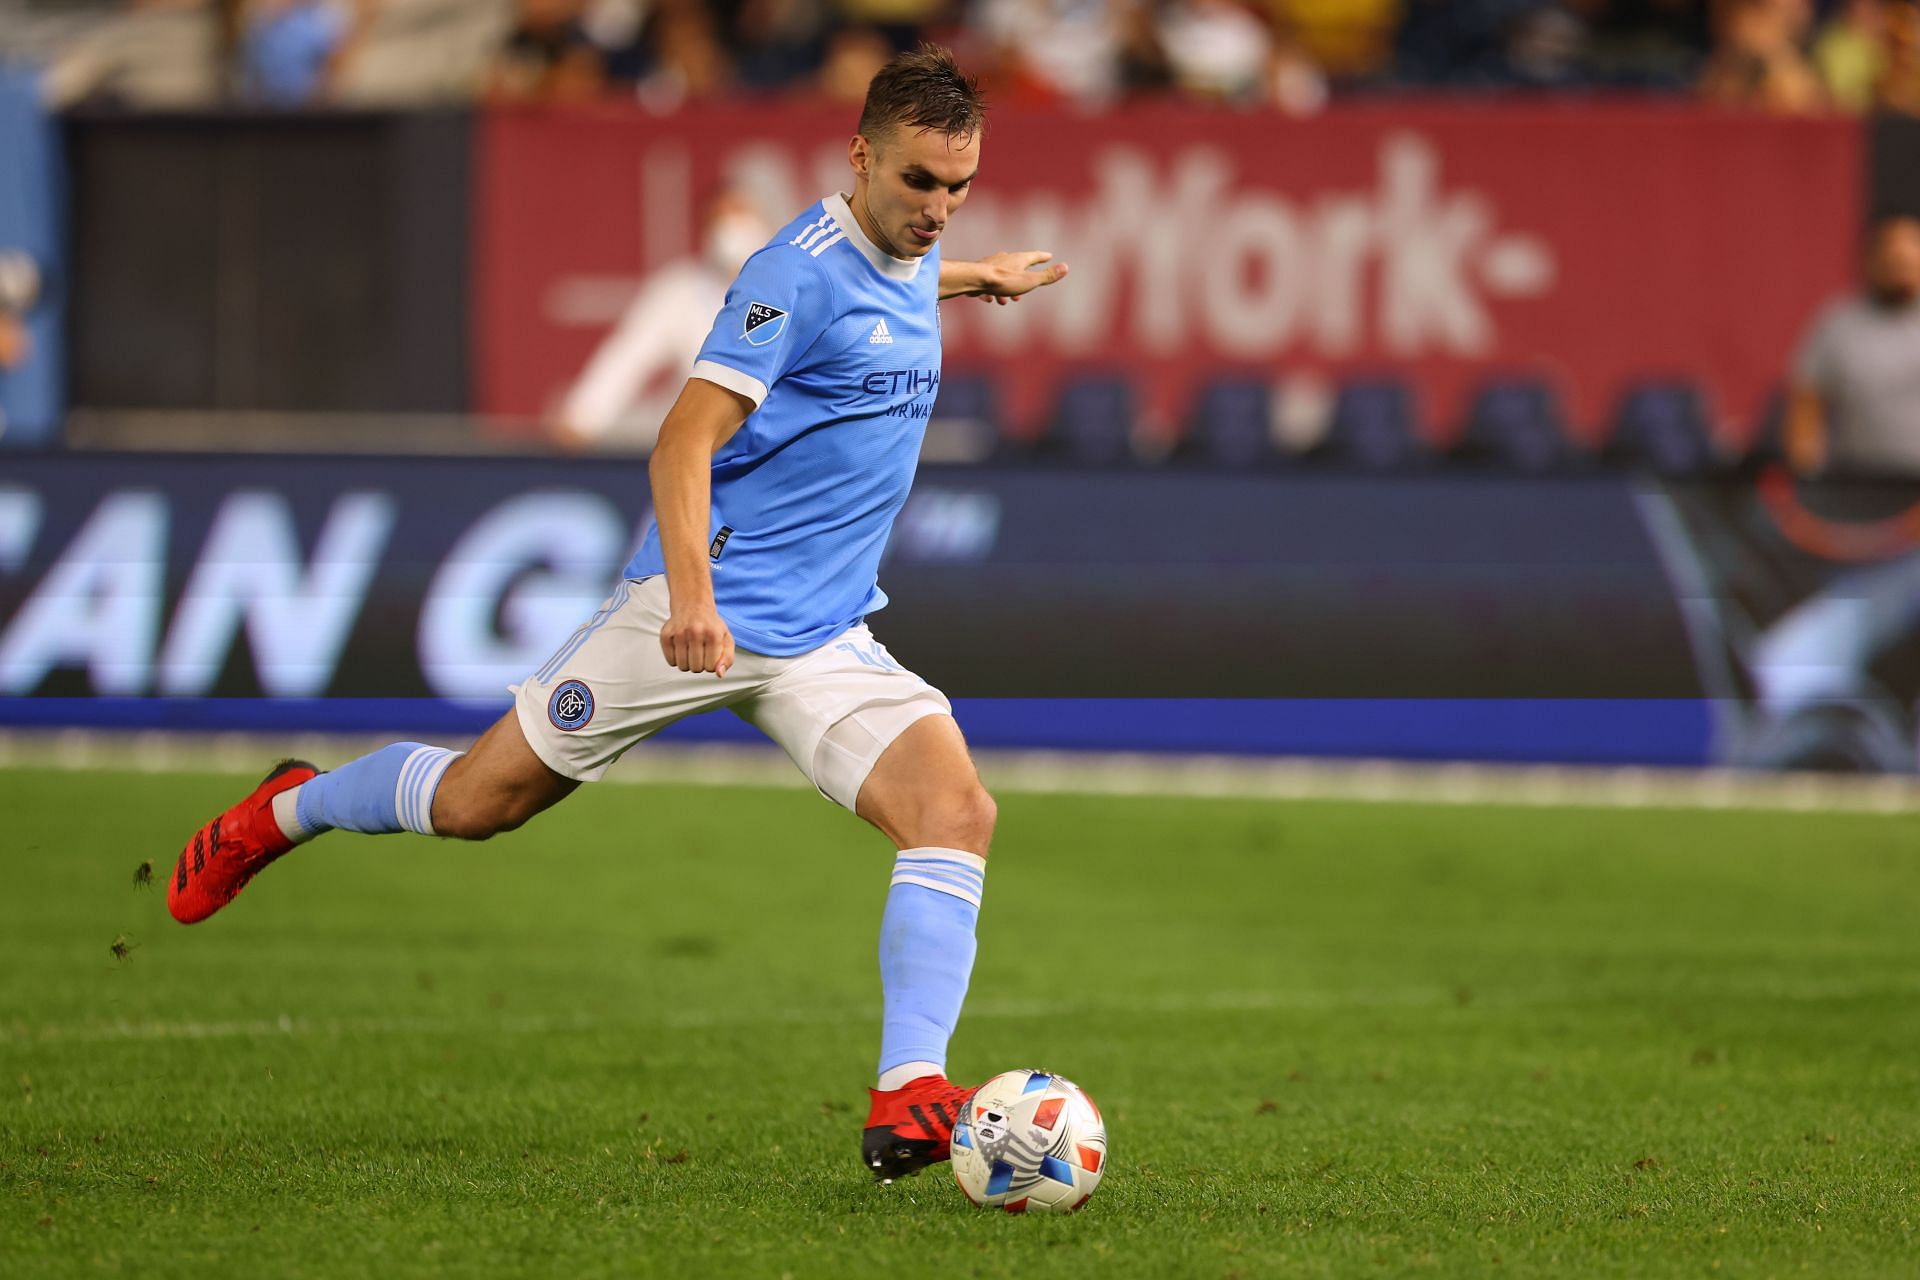 New York City face Chicago Fire in their upcoming MLS fixture